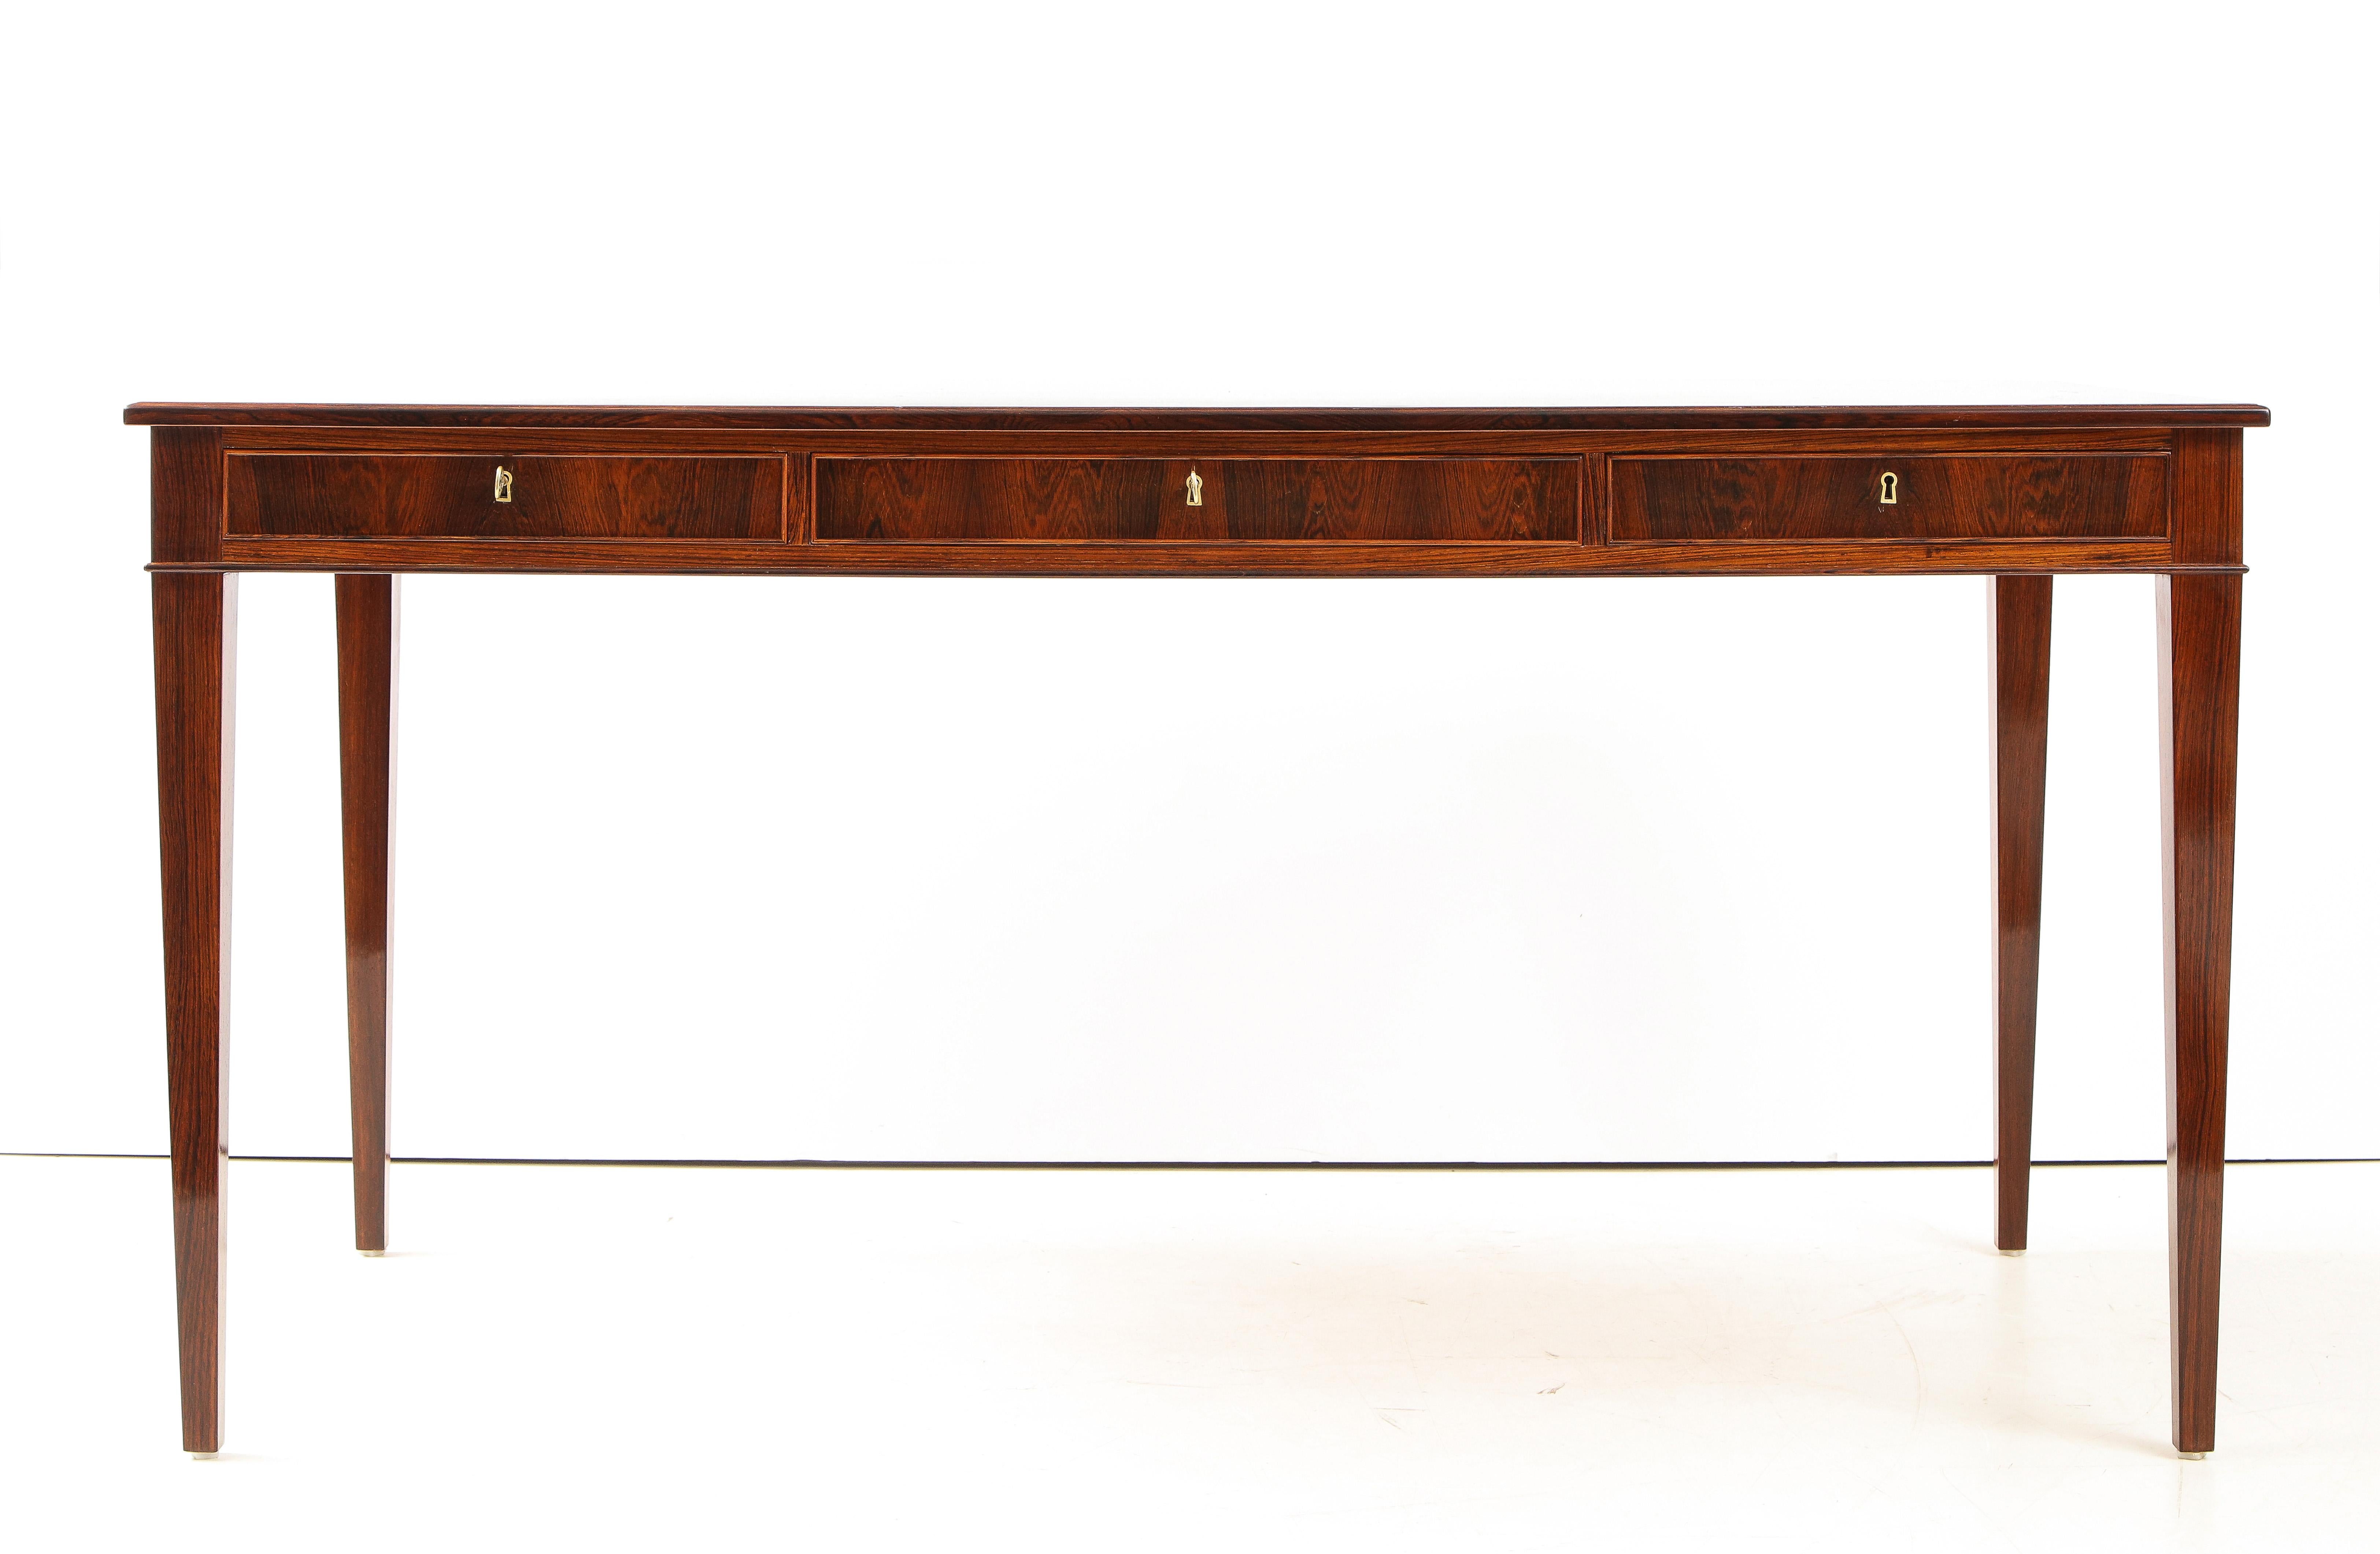 A Danish rosewood writing desk by Frits Henningsen, furniture designer and cabinet maker, (1889-1965). This desk is a Classic example of Henningsen's elegant clean lines and use of quality woods with perfect balanced craftsmanship. Designed in 1933.